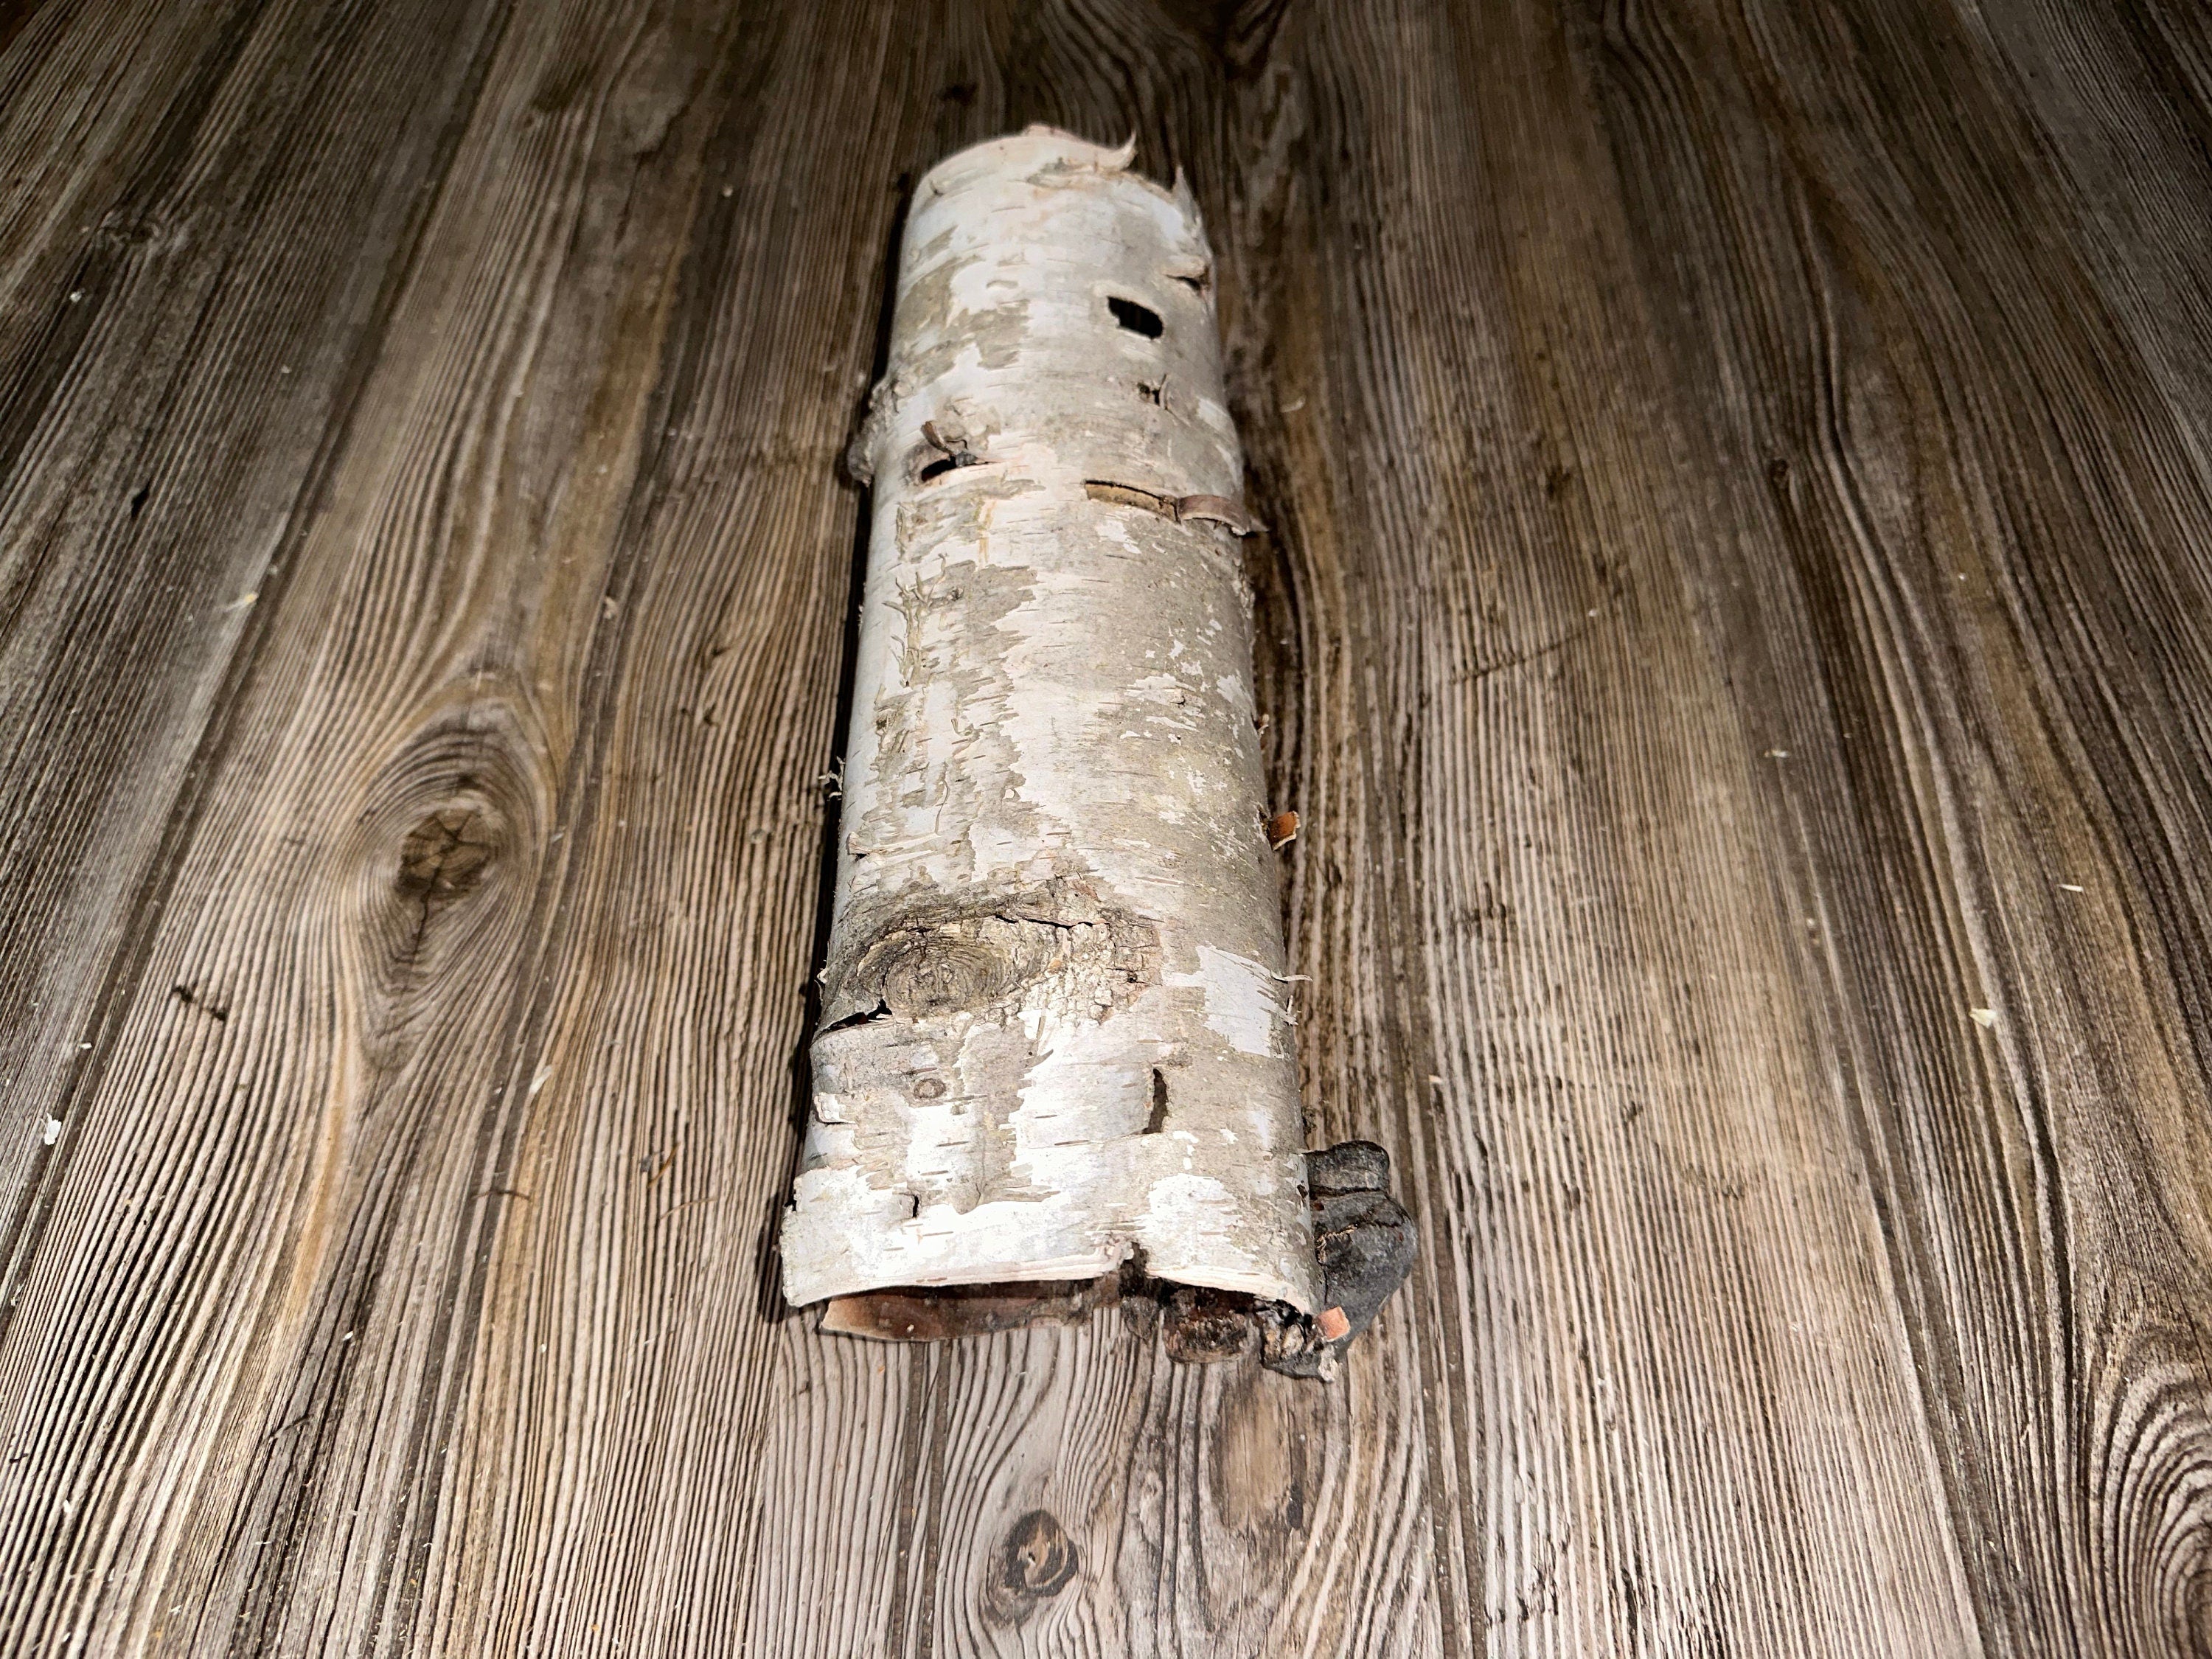 One White Birch Tube, Approximately 11.5 Inches Long by About 3.5 Inches Wide and 3 Inches High